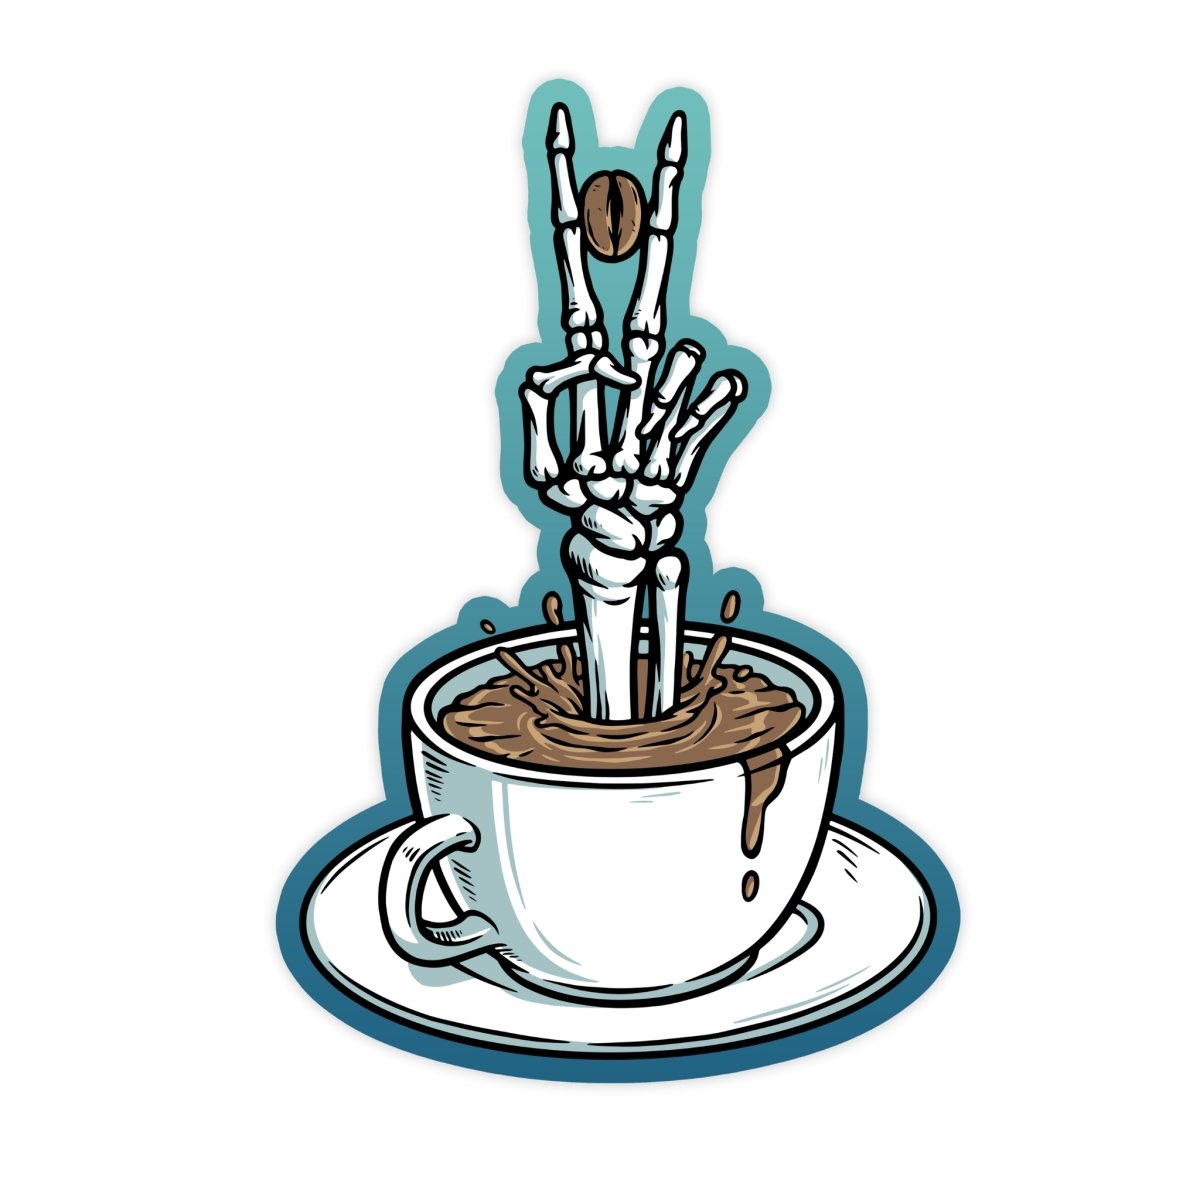 Coffee Lover Skelton Hand Peace Sign Sticker - stickerbullCoffee Lover Skelton Hand Peace Sign StickerRetail StickerstickerbullstickerbullCoffeePeace_#205Coffee Lover Skelton Hand Peace Sign Sticker